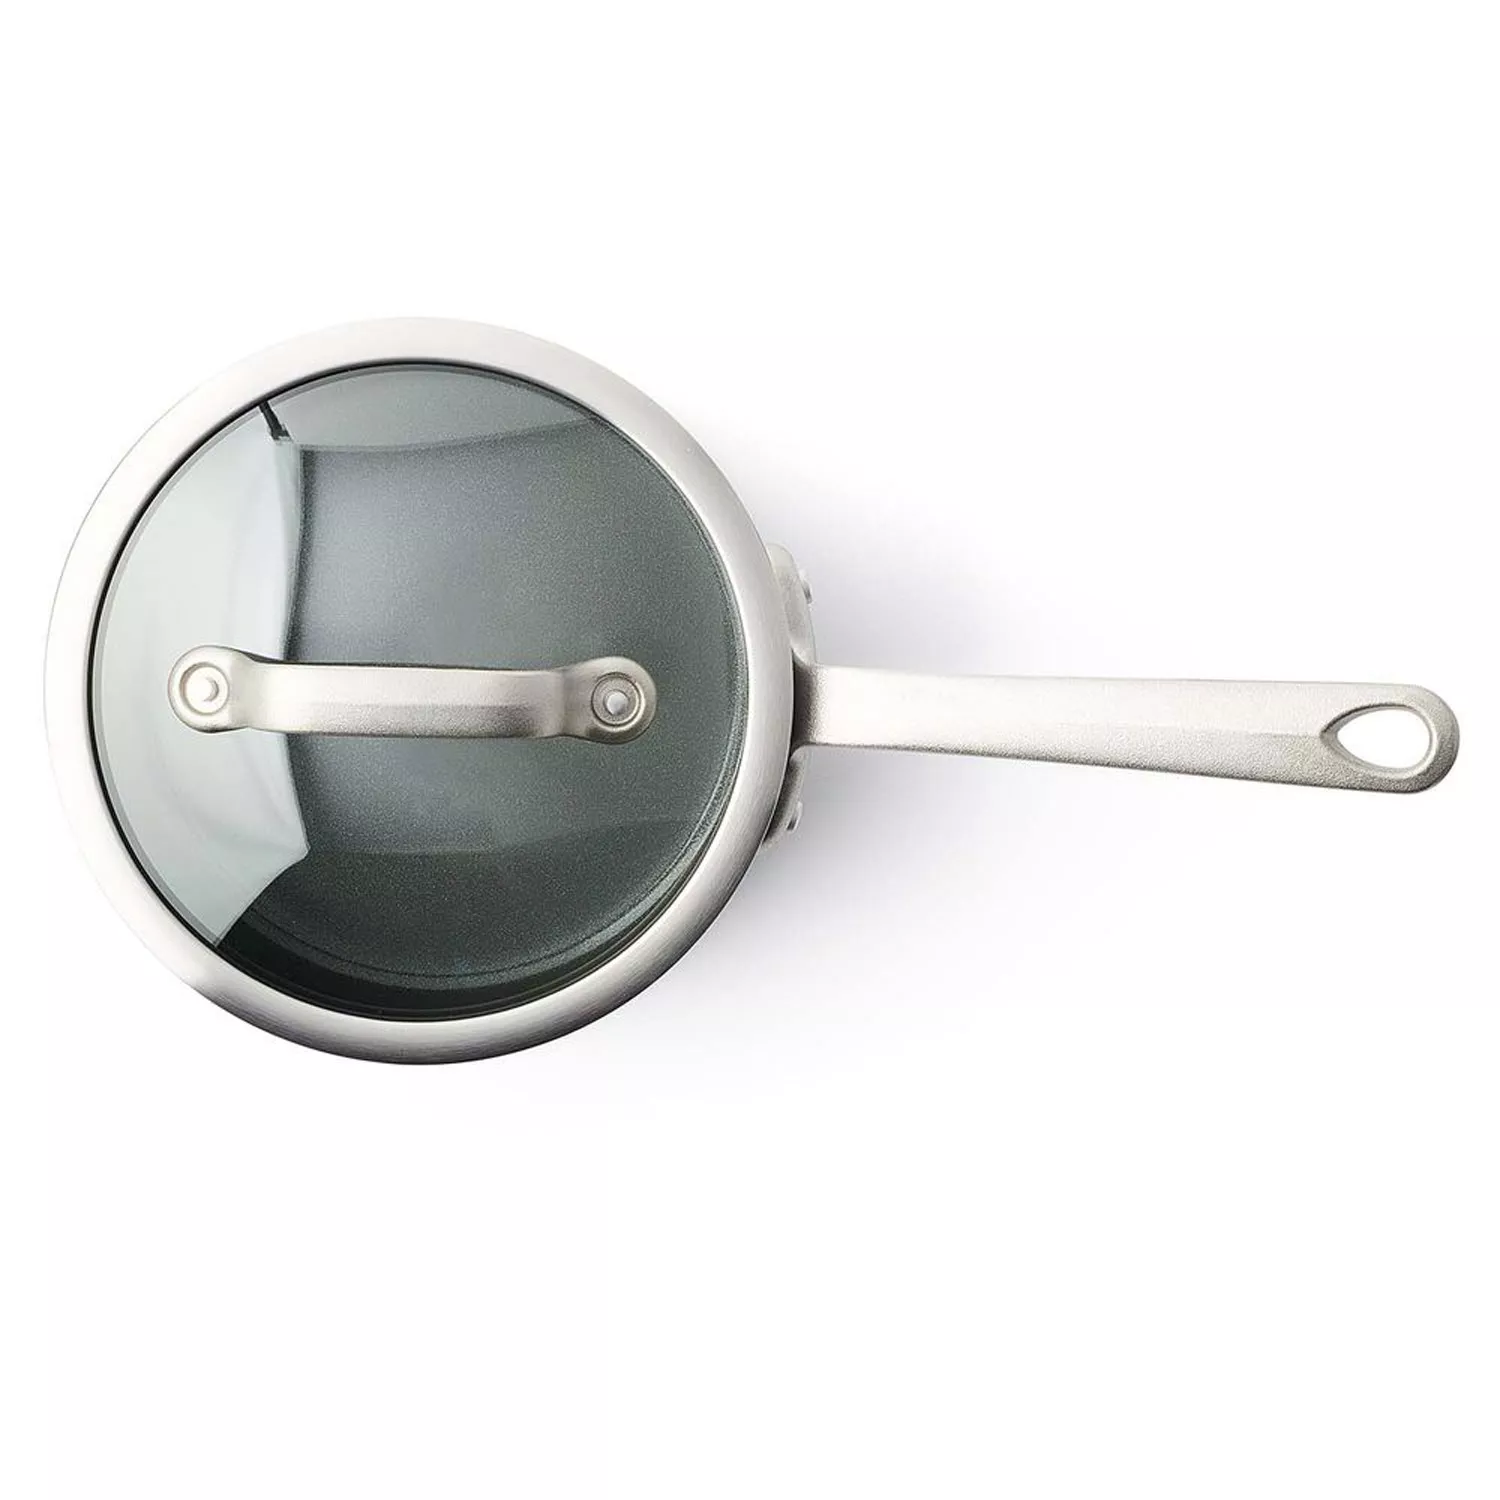 GreenPan Craft Steel Chef’s Pan with Lid, 5 qt, Silver